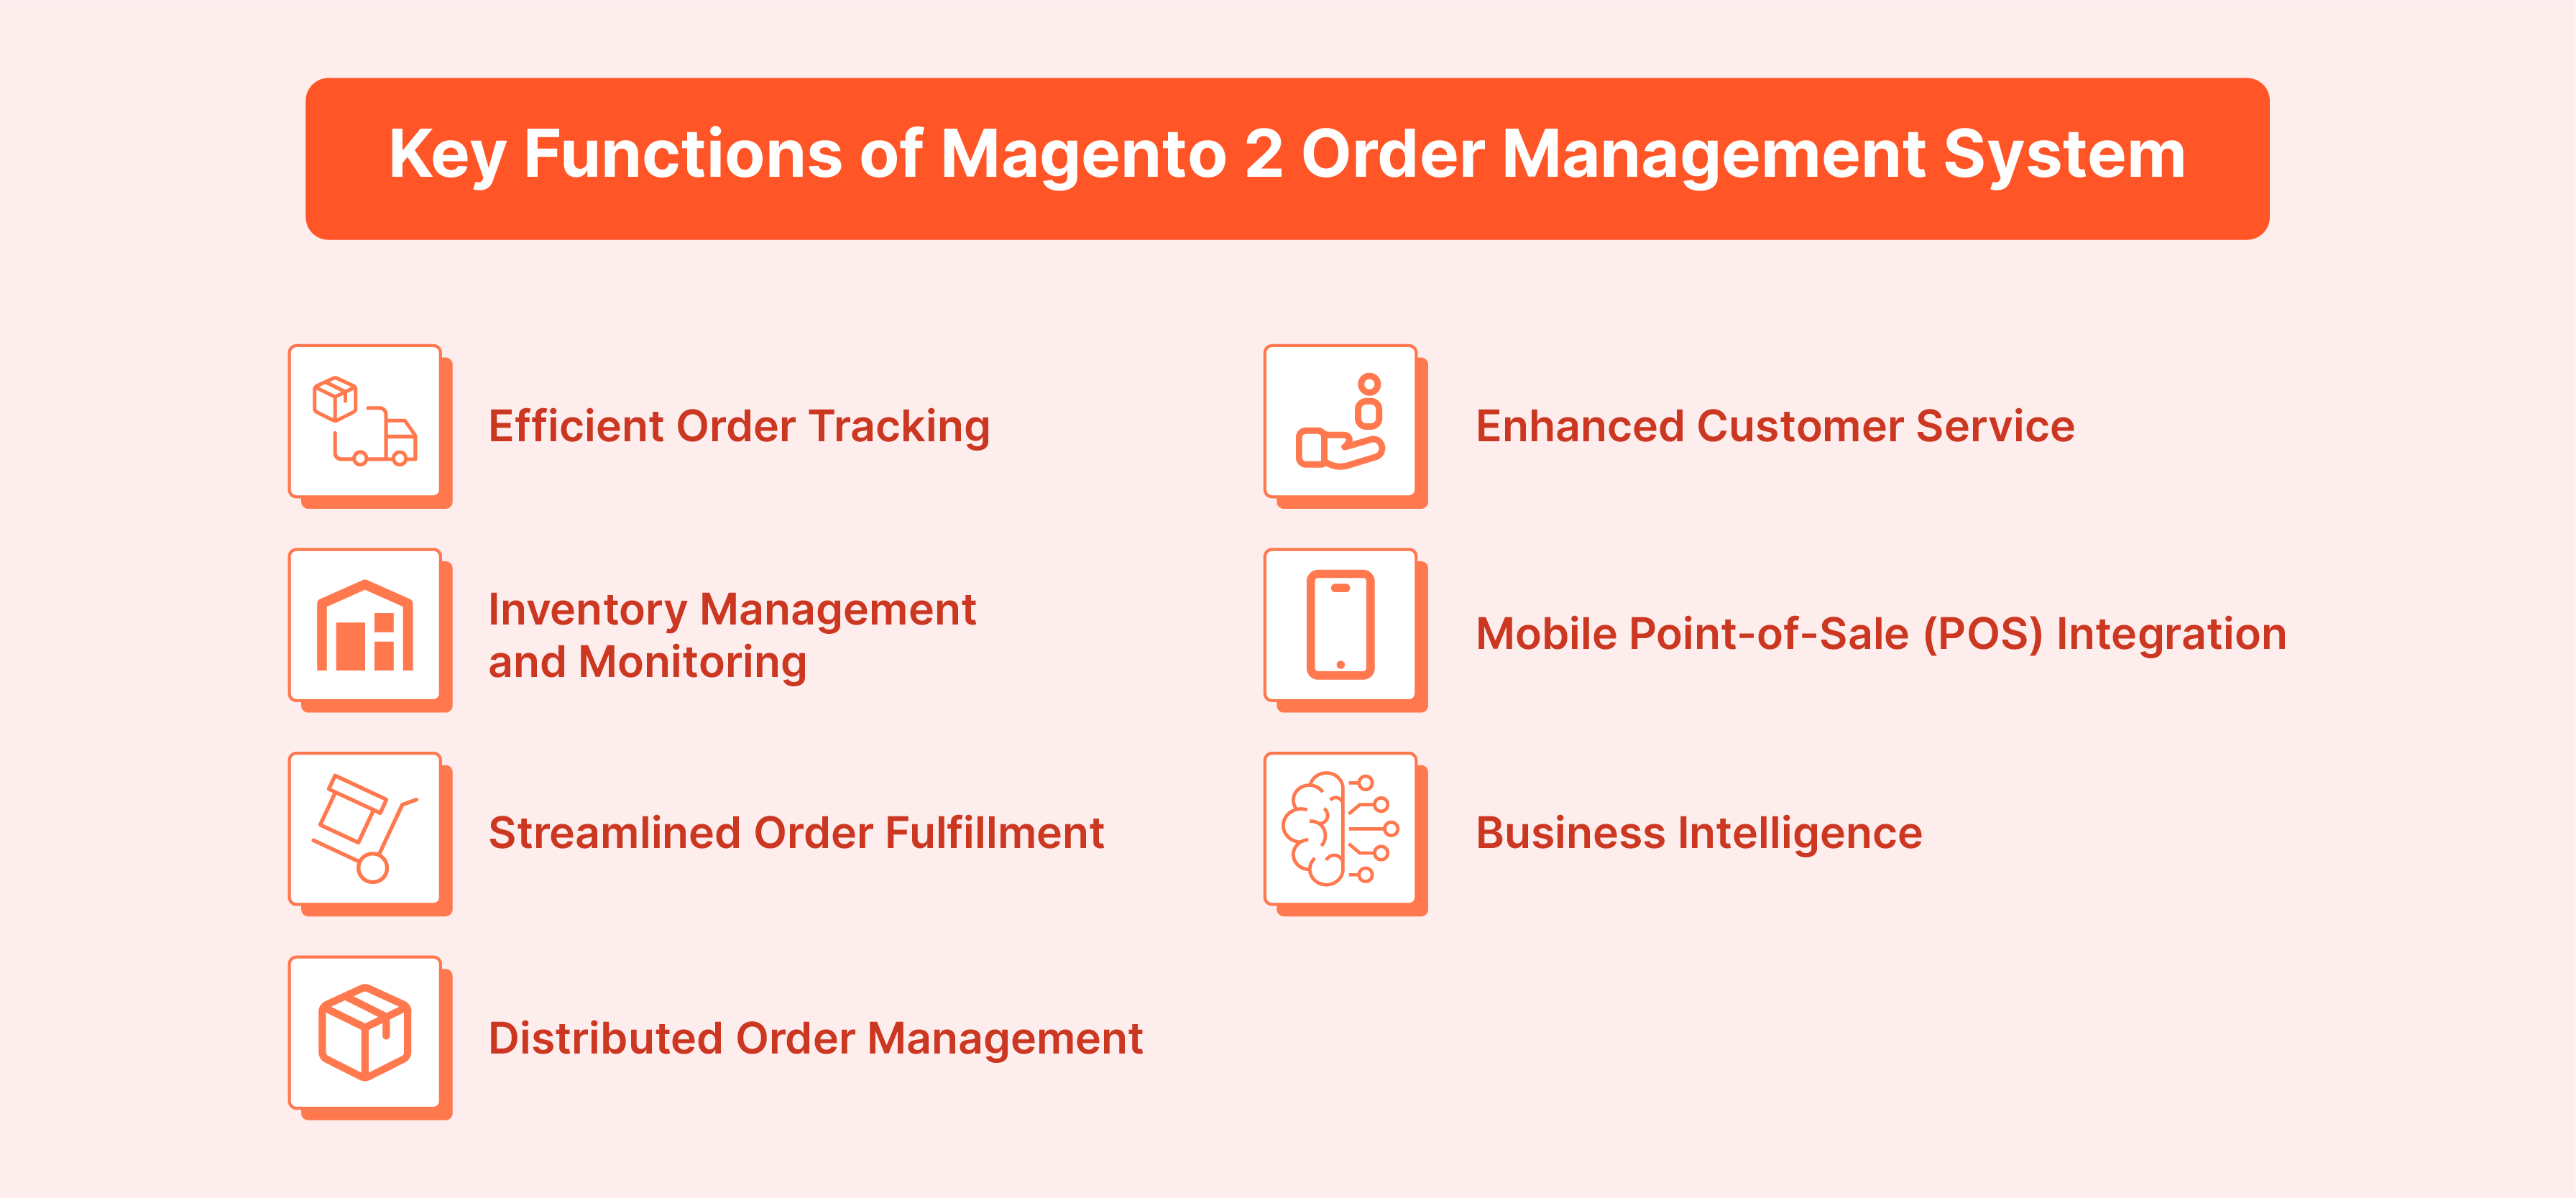 Essential functions of Magento 2 OMS